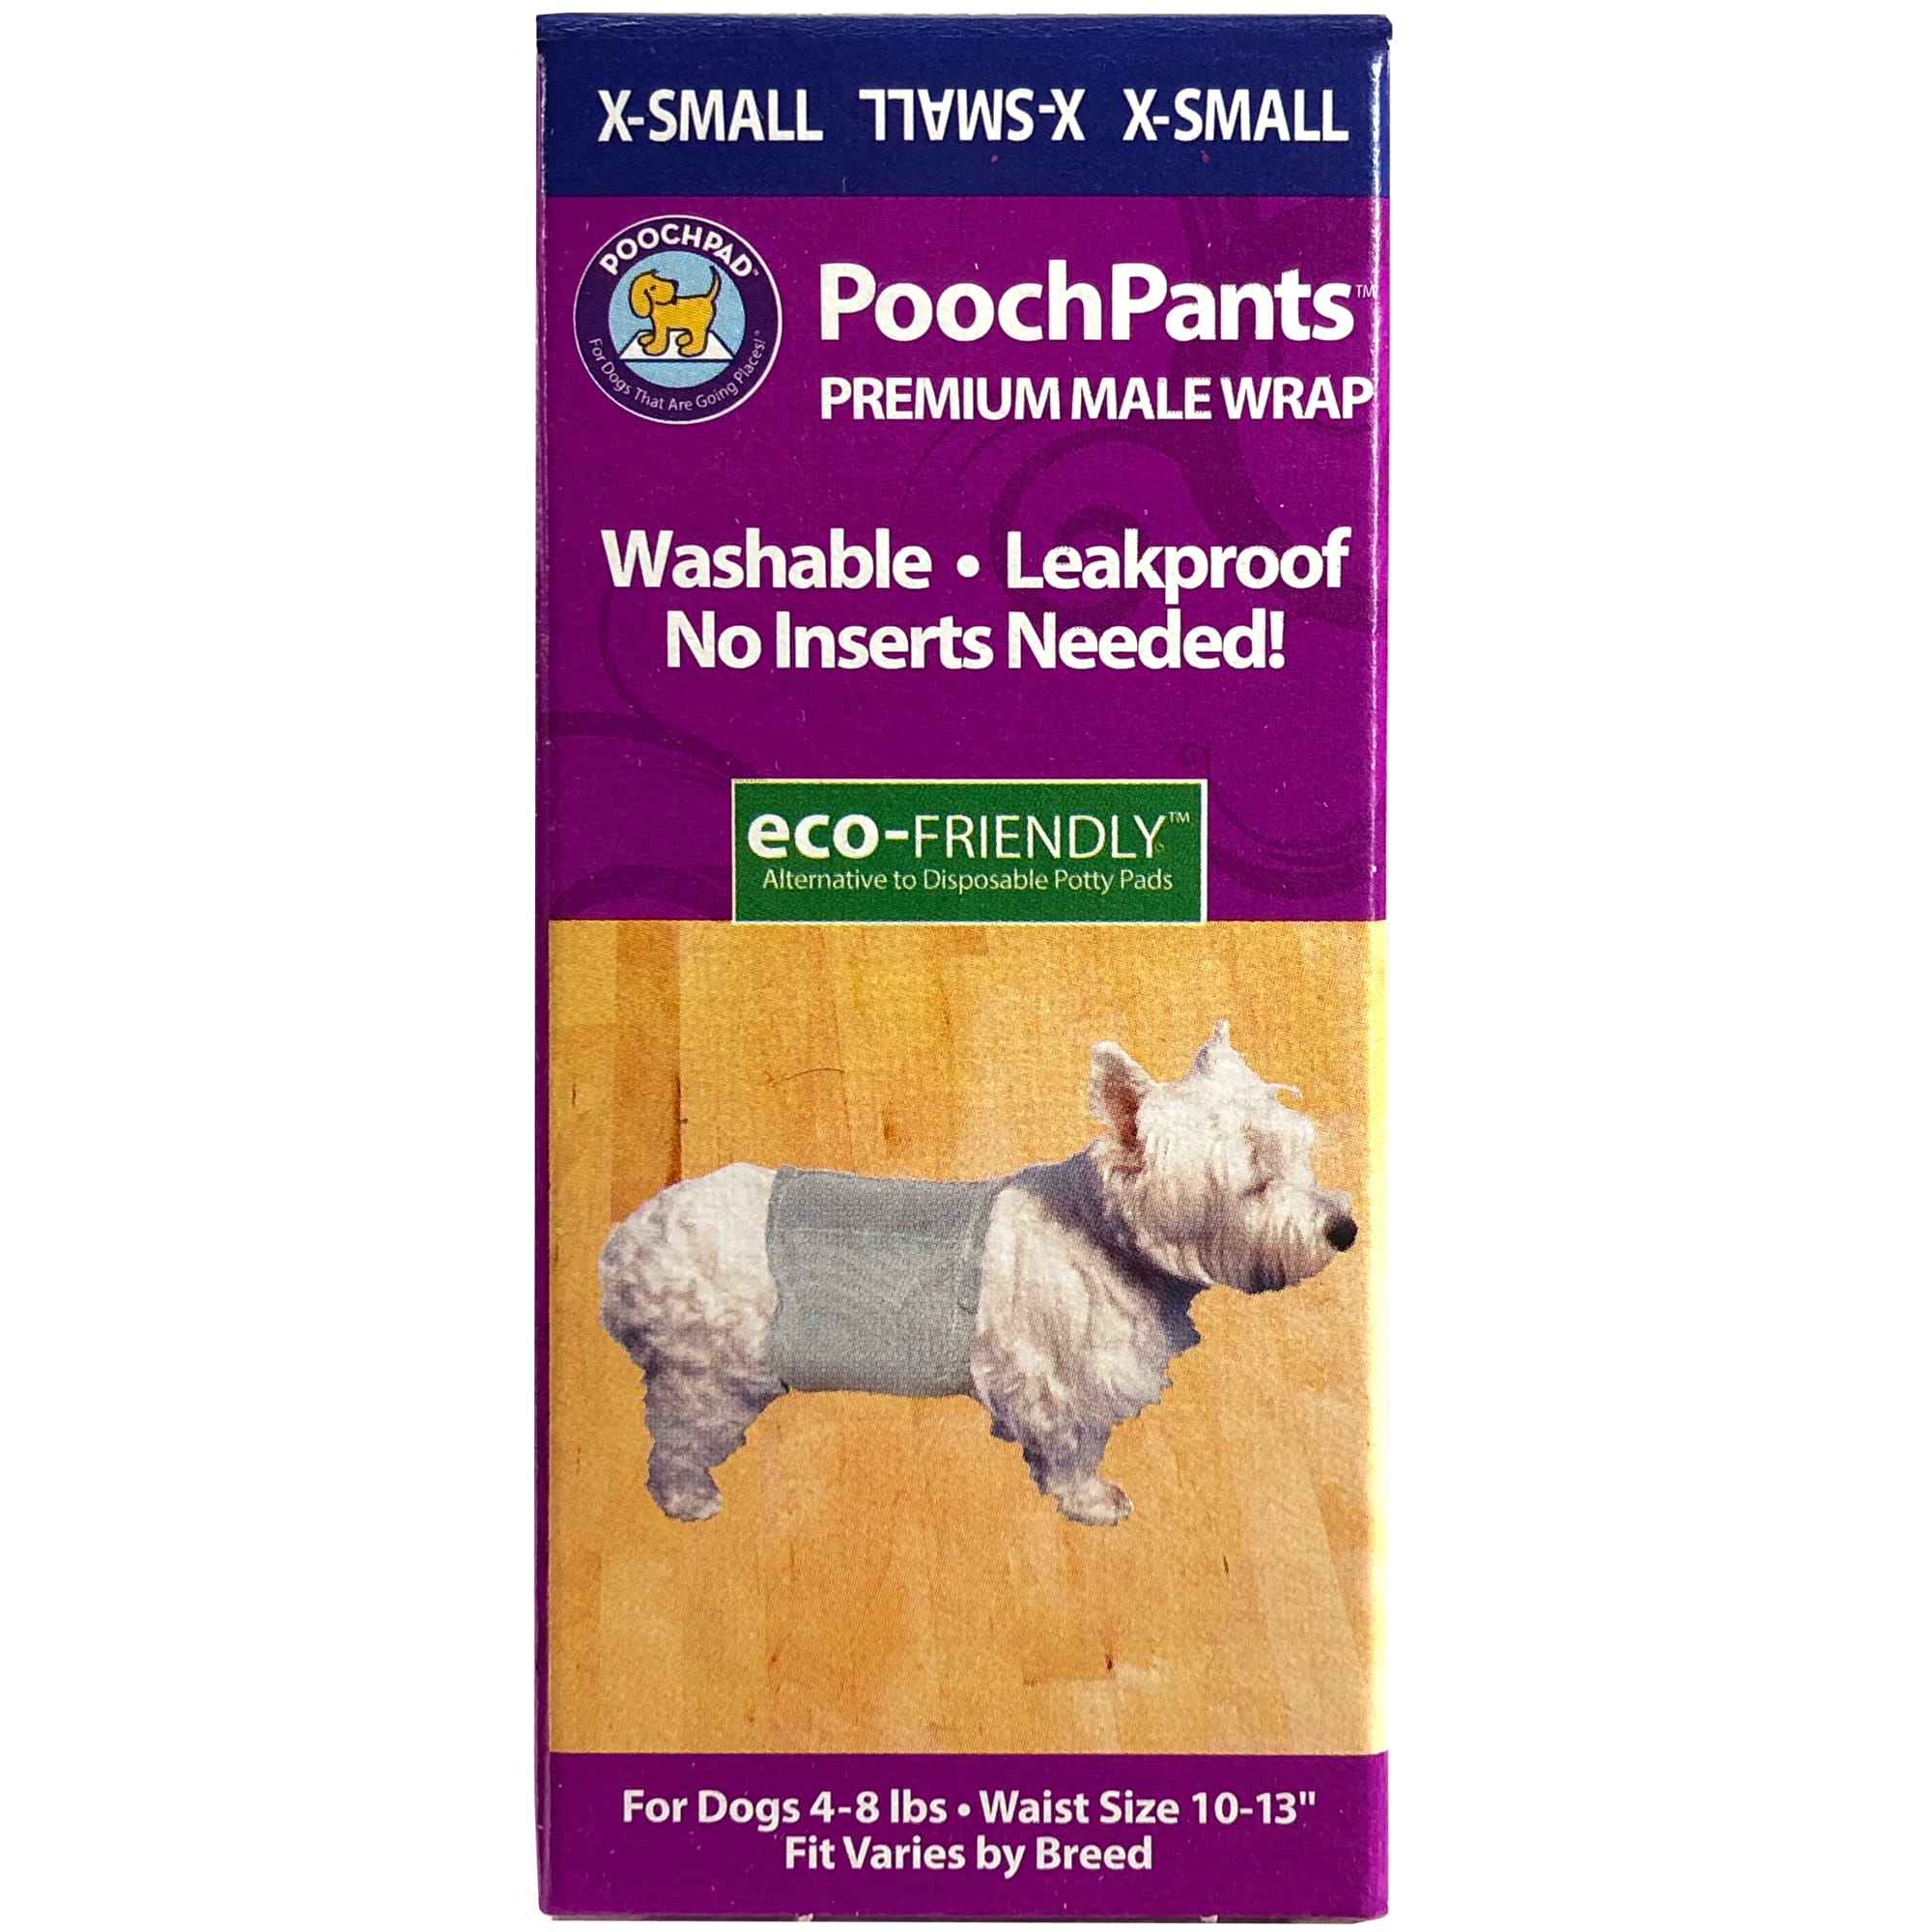 Pooch Pad PoochPant Diaper X-Large